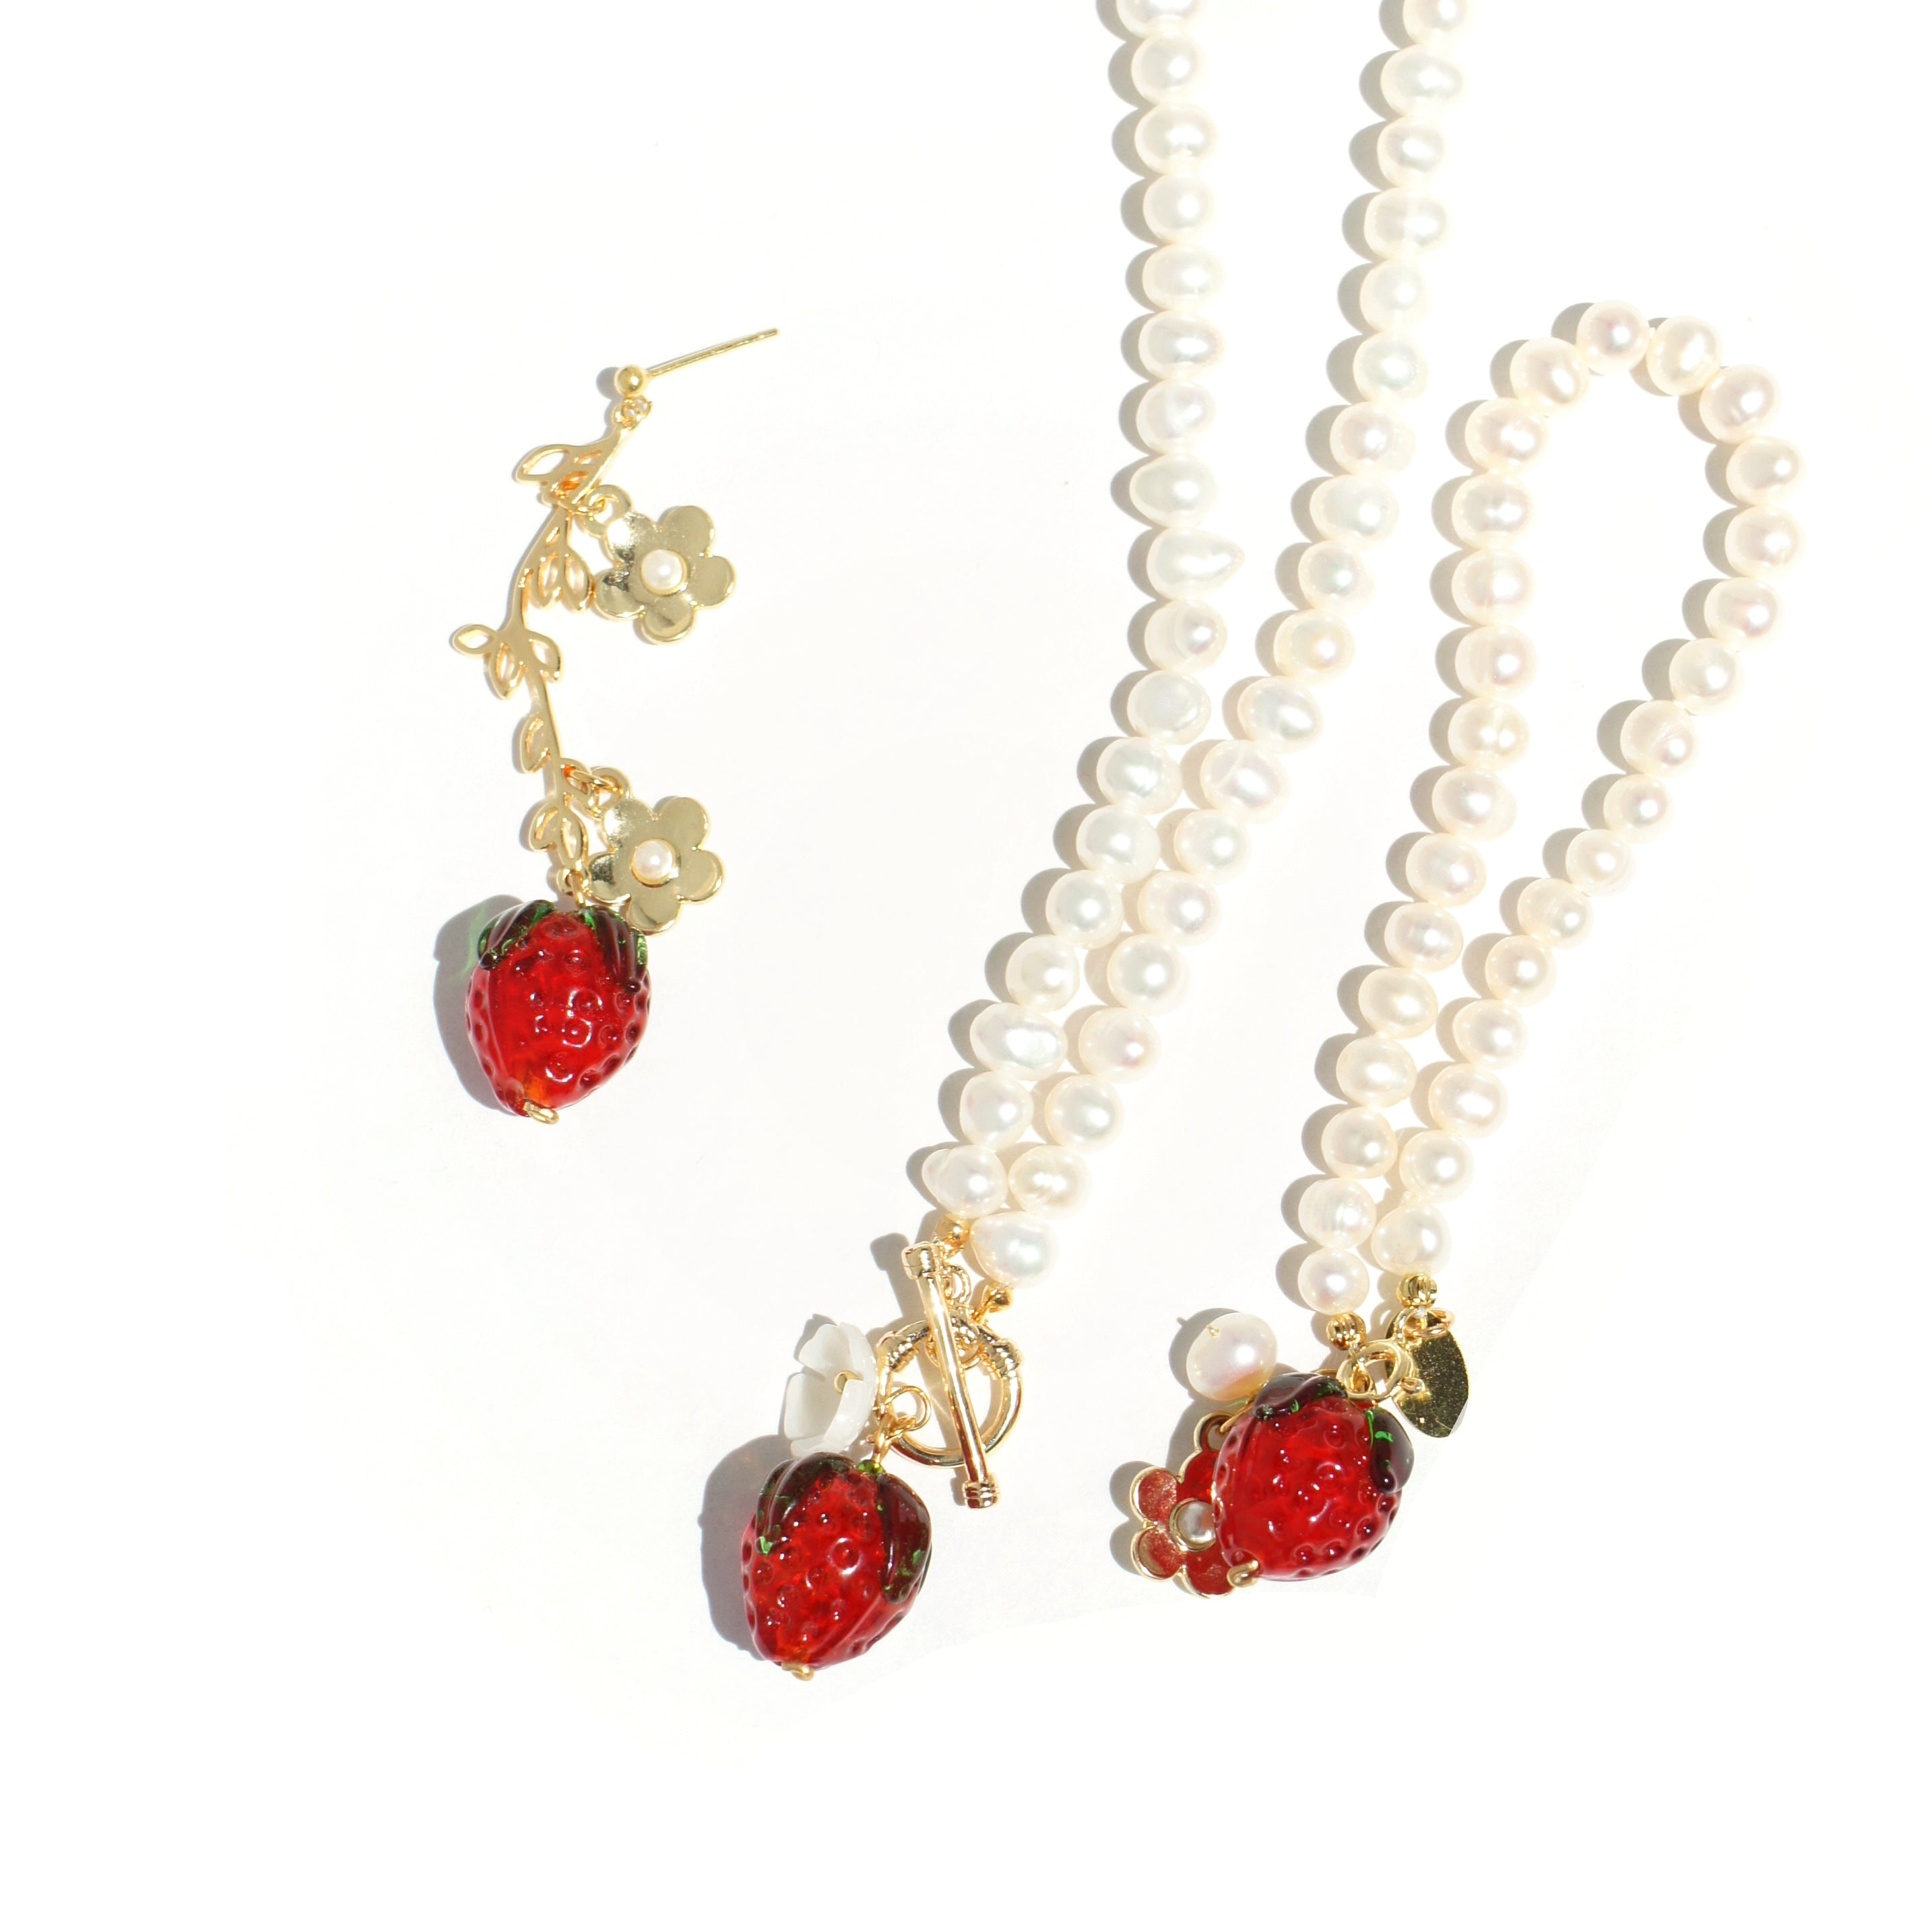 Strawberry and Flower Freshwater Pearl Necklace